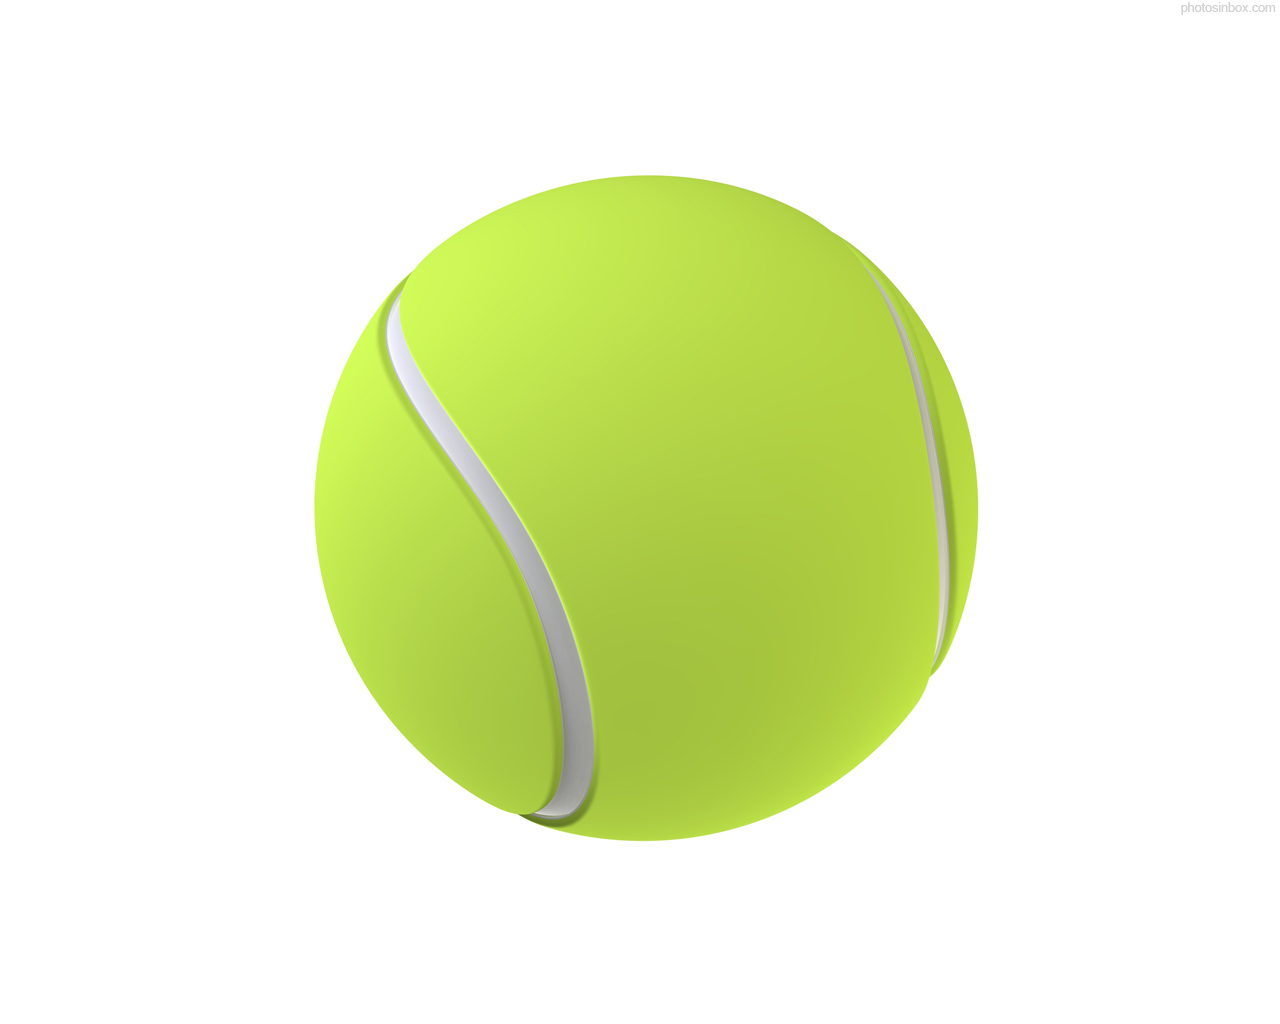 Isolated Tennis Ball image - vector clip art online, royalty free ...